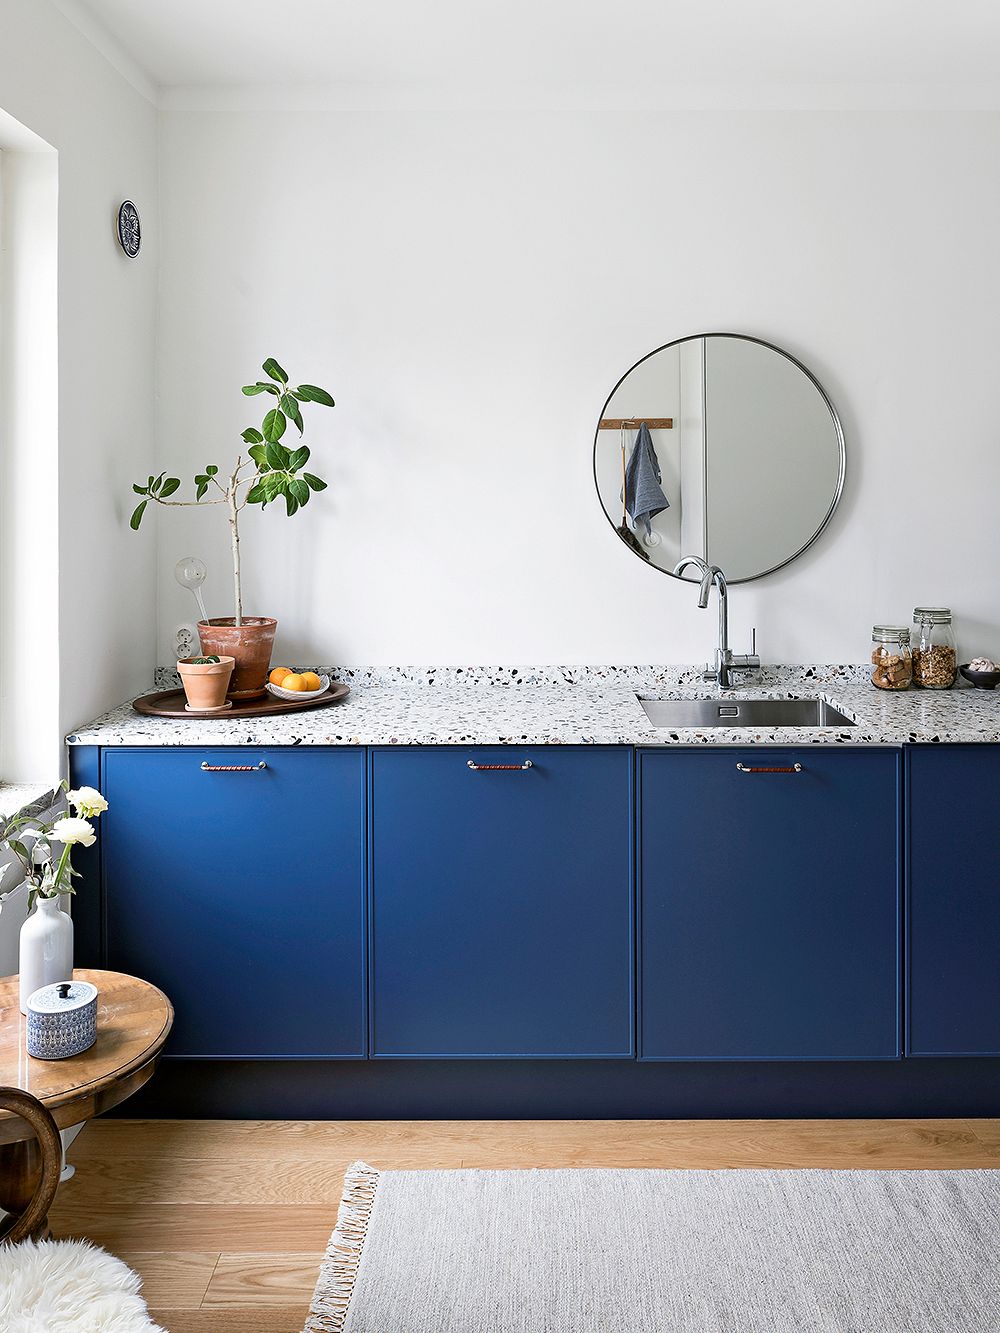 Blueberry-colored kitchen cabinets